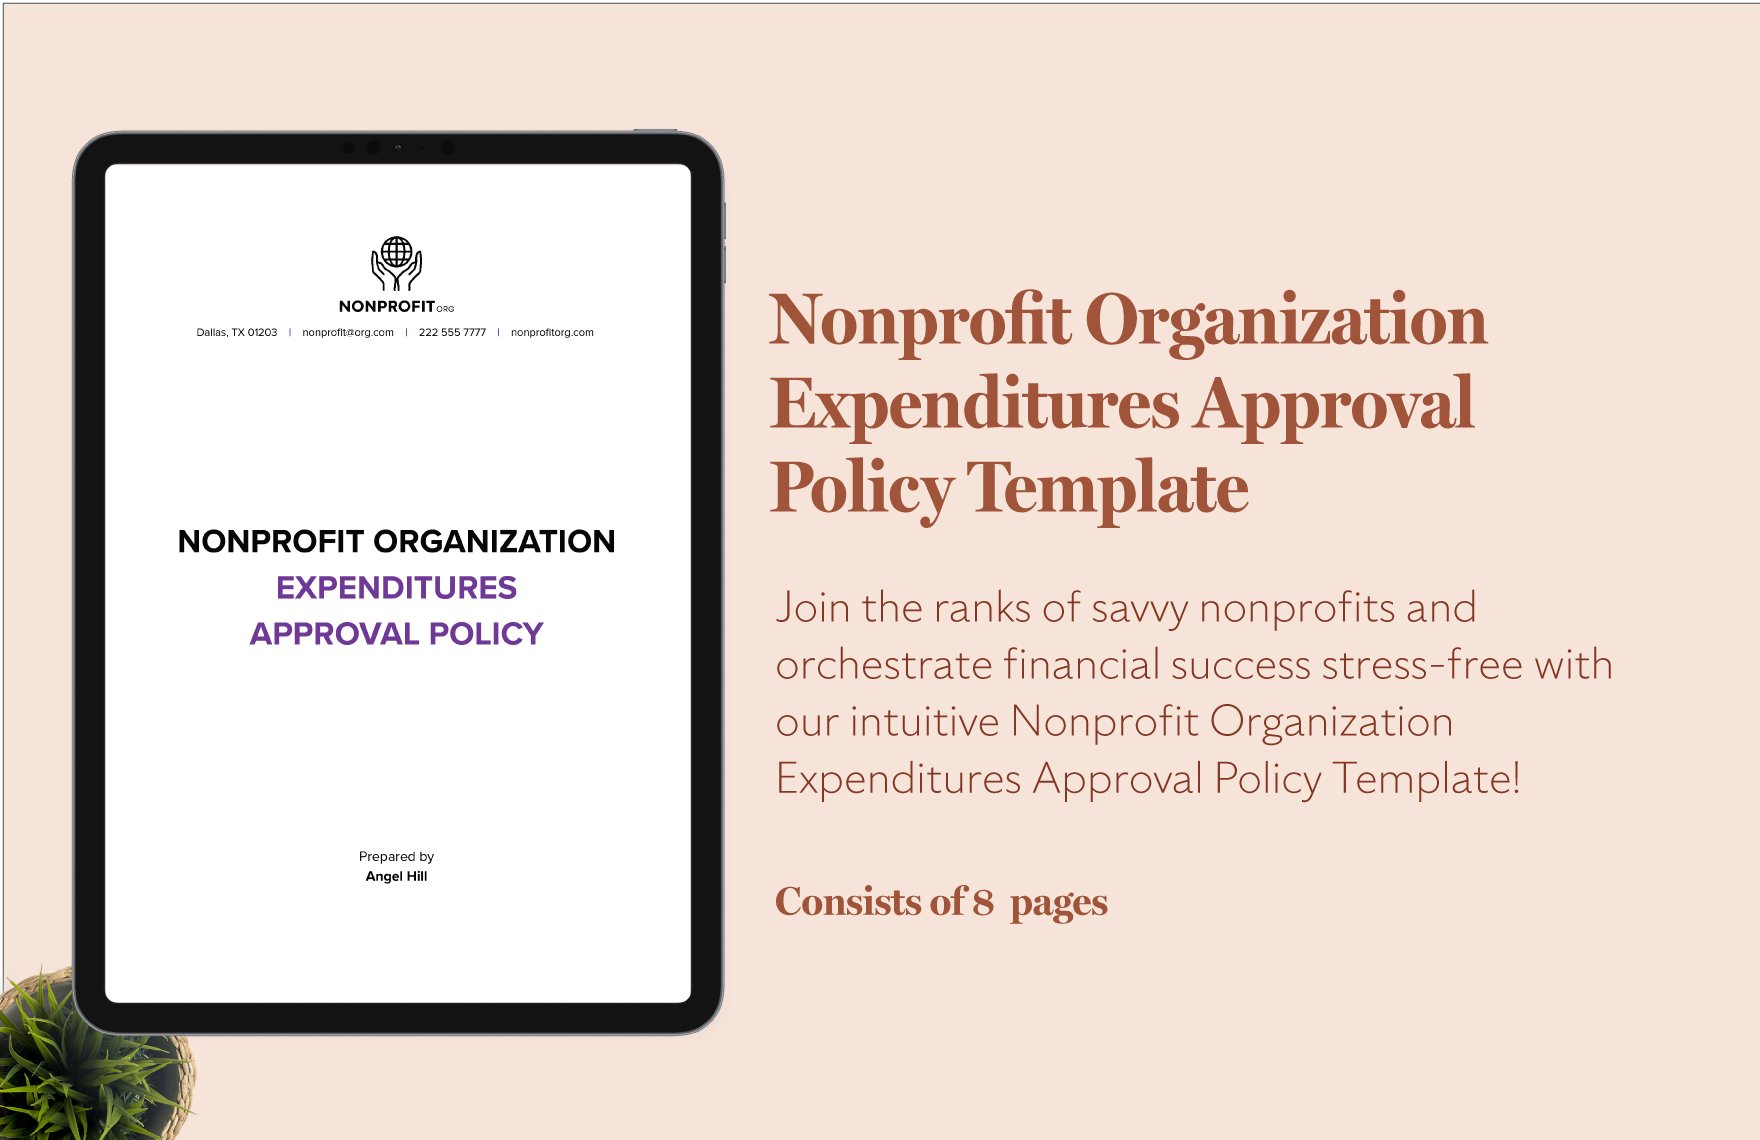 Nonprofit Organization Expenditures Approval Policy Template